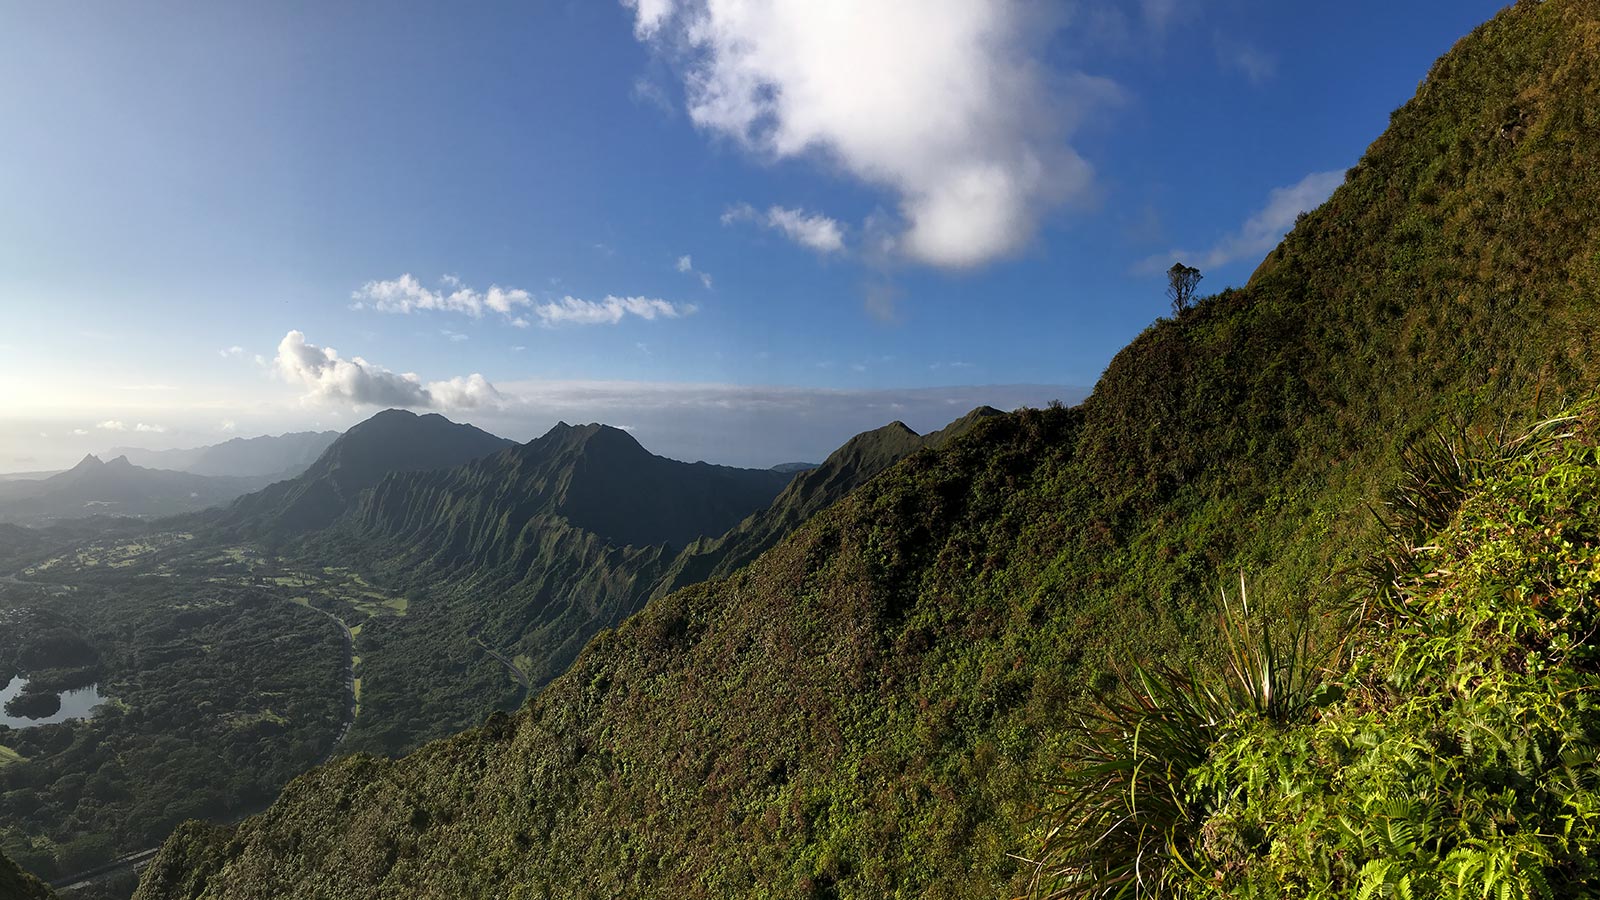 Mountain view from Stairway to Heaven in Oahu, Hawaii. Climbing the stairway to heaven, Hawaii & full guide